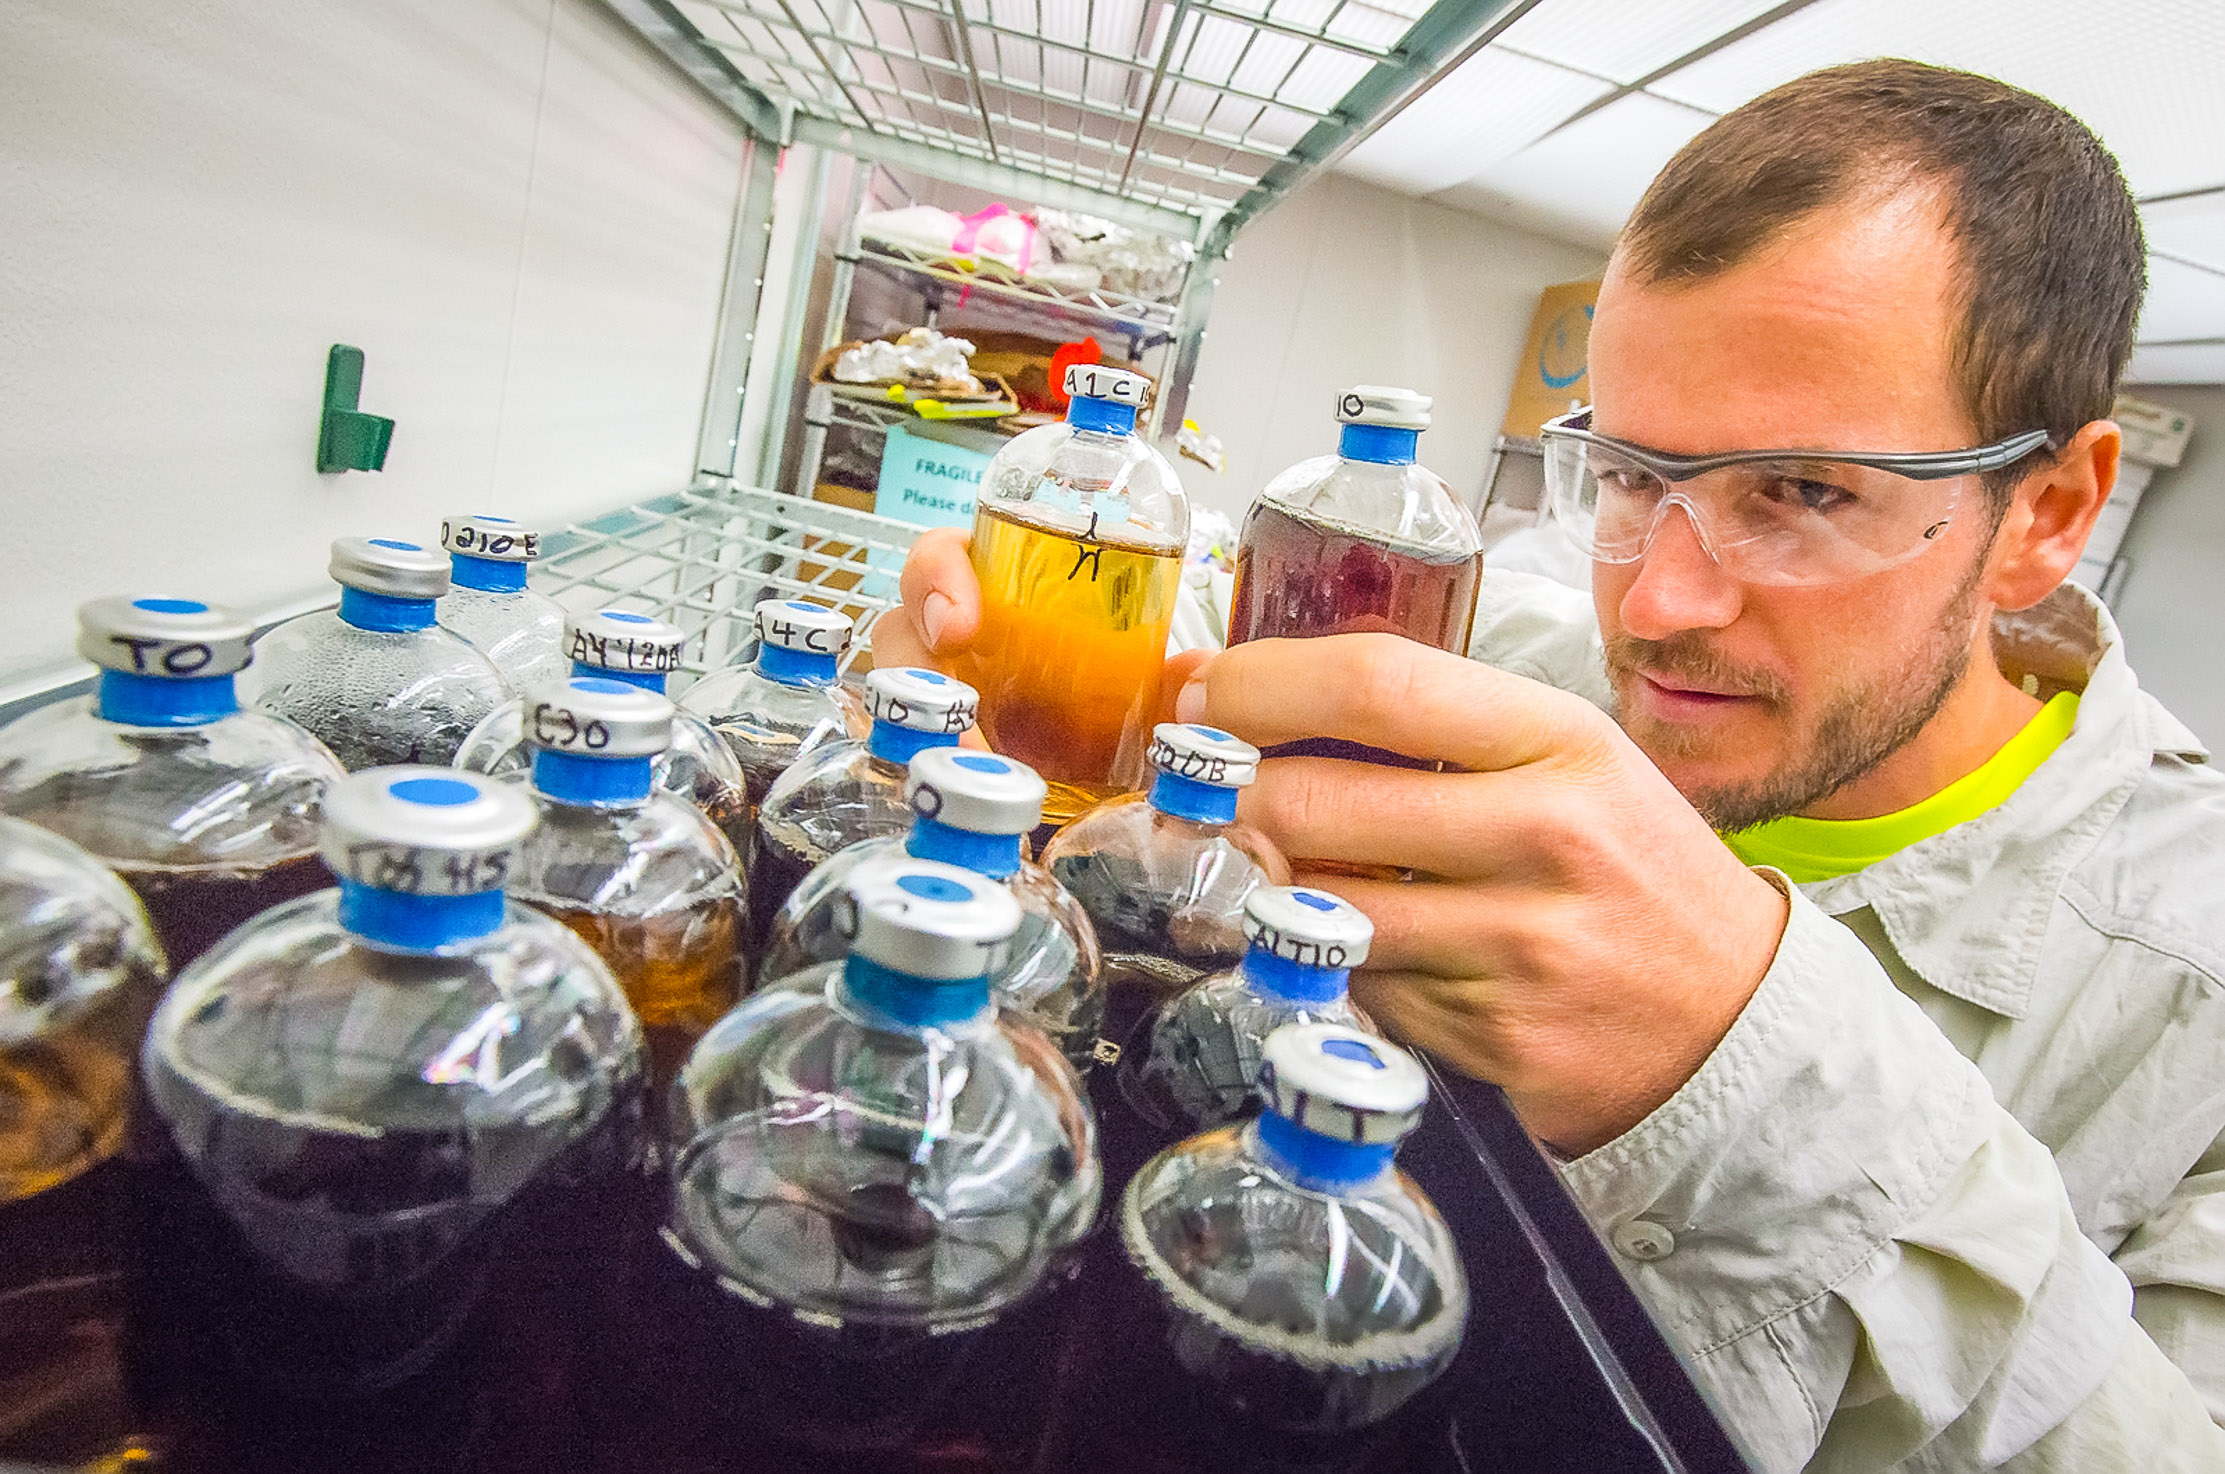 A scientist looking intently at several sample bottles full of dark liquid in a lab